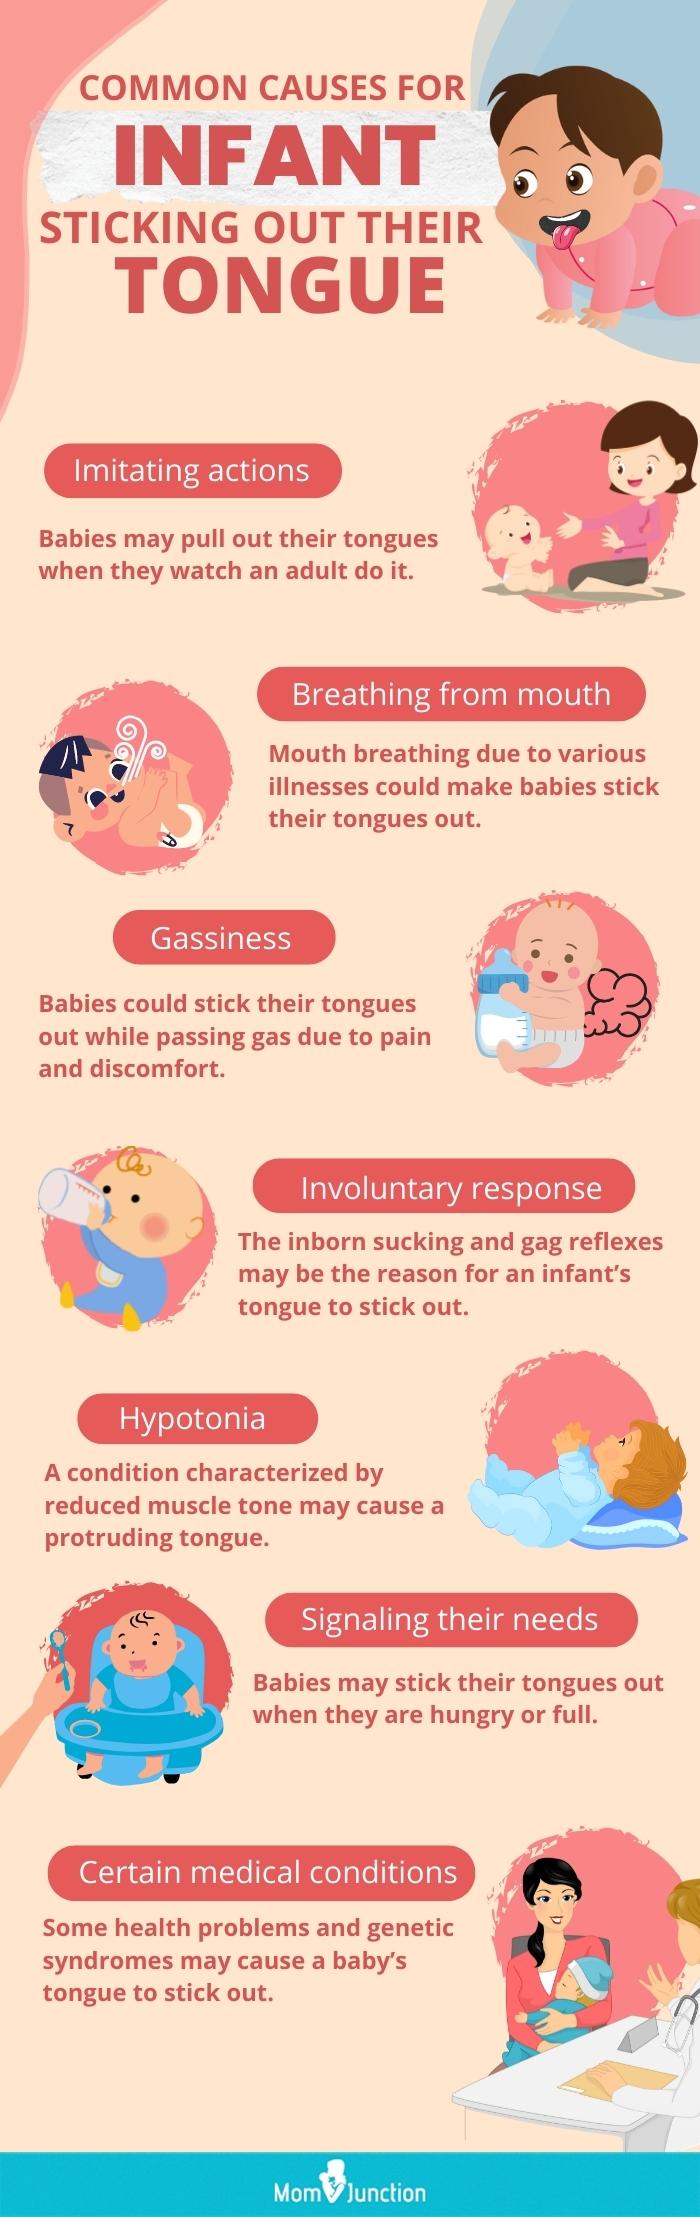 why do babies stick their tongue out (infographic)